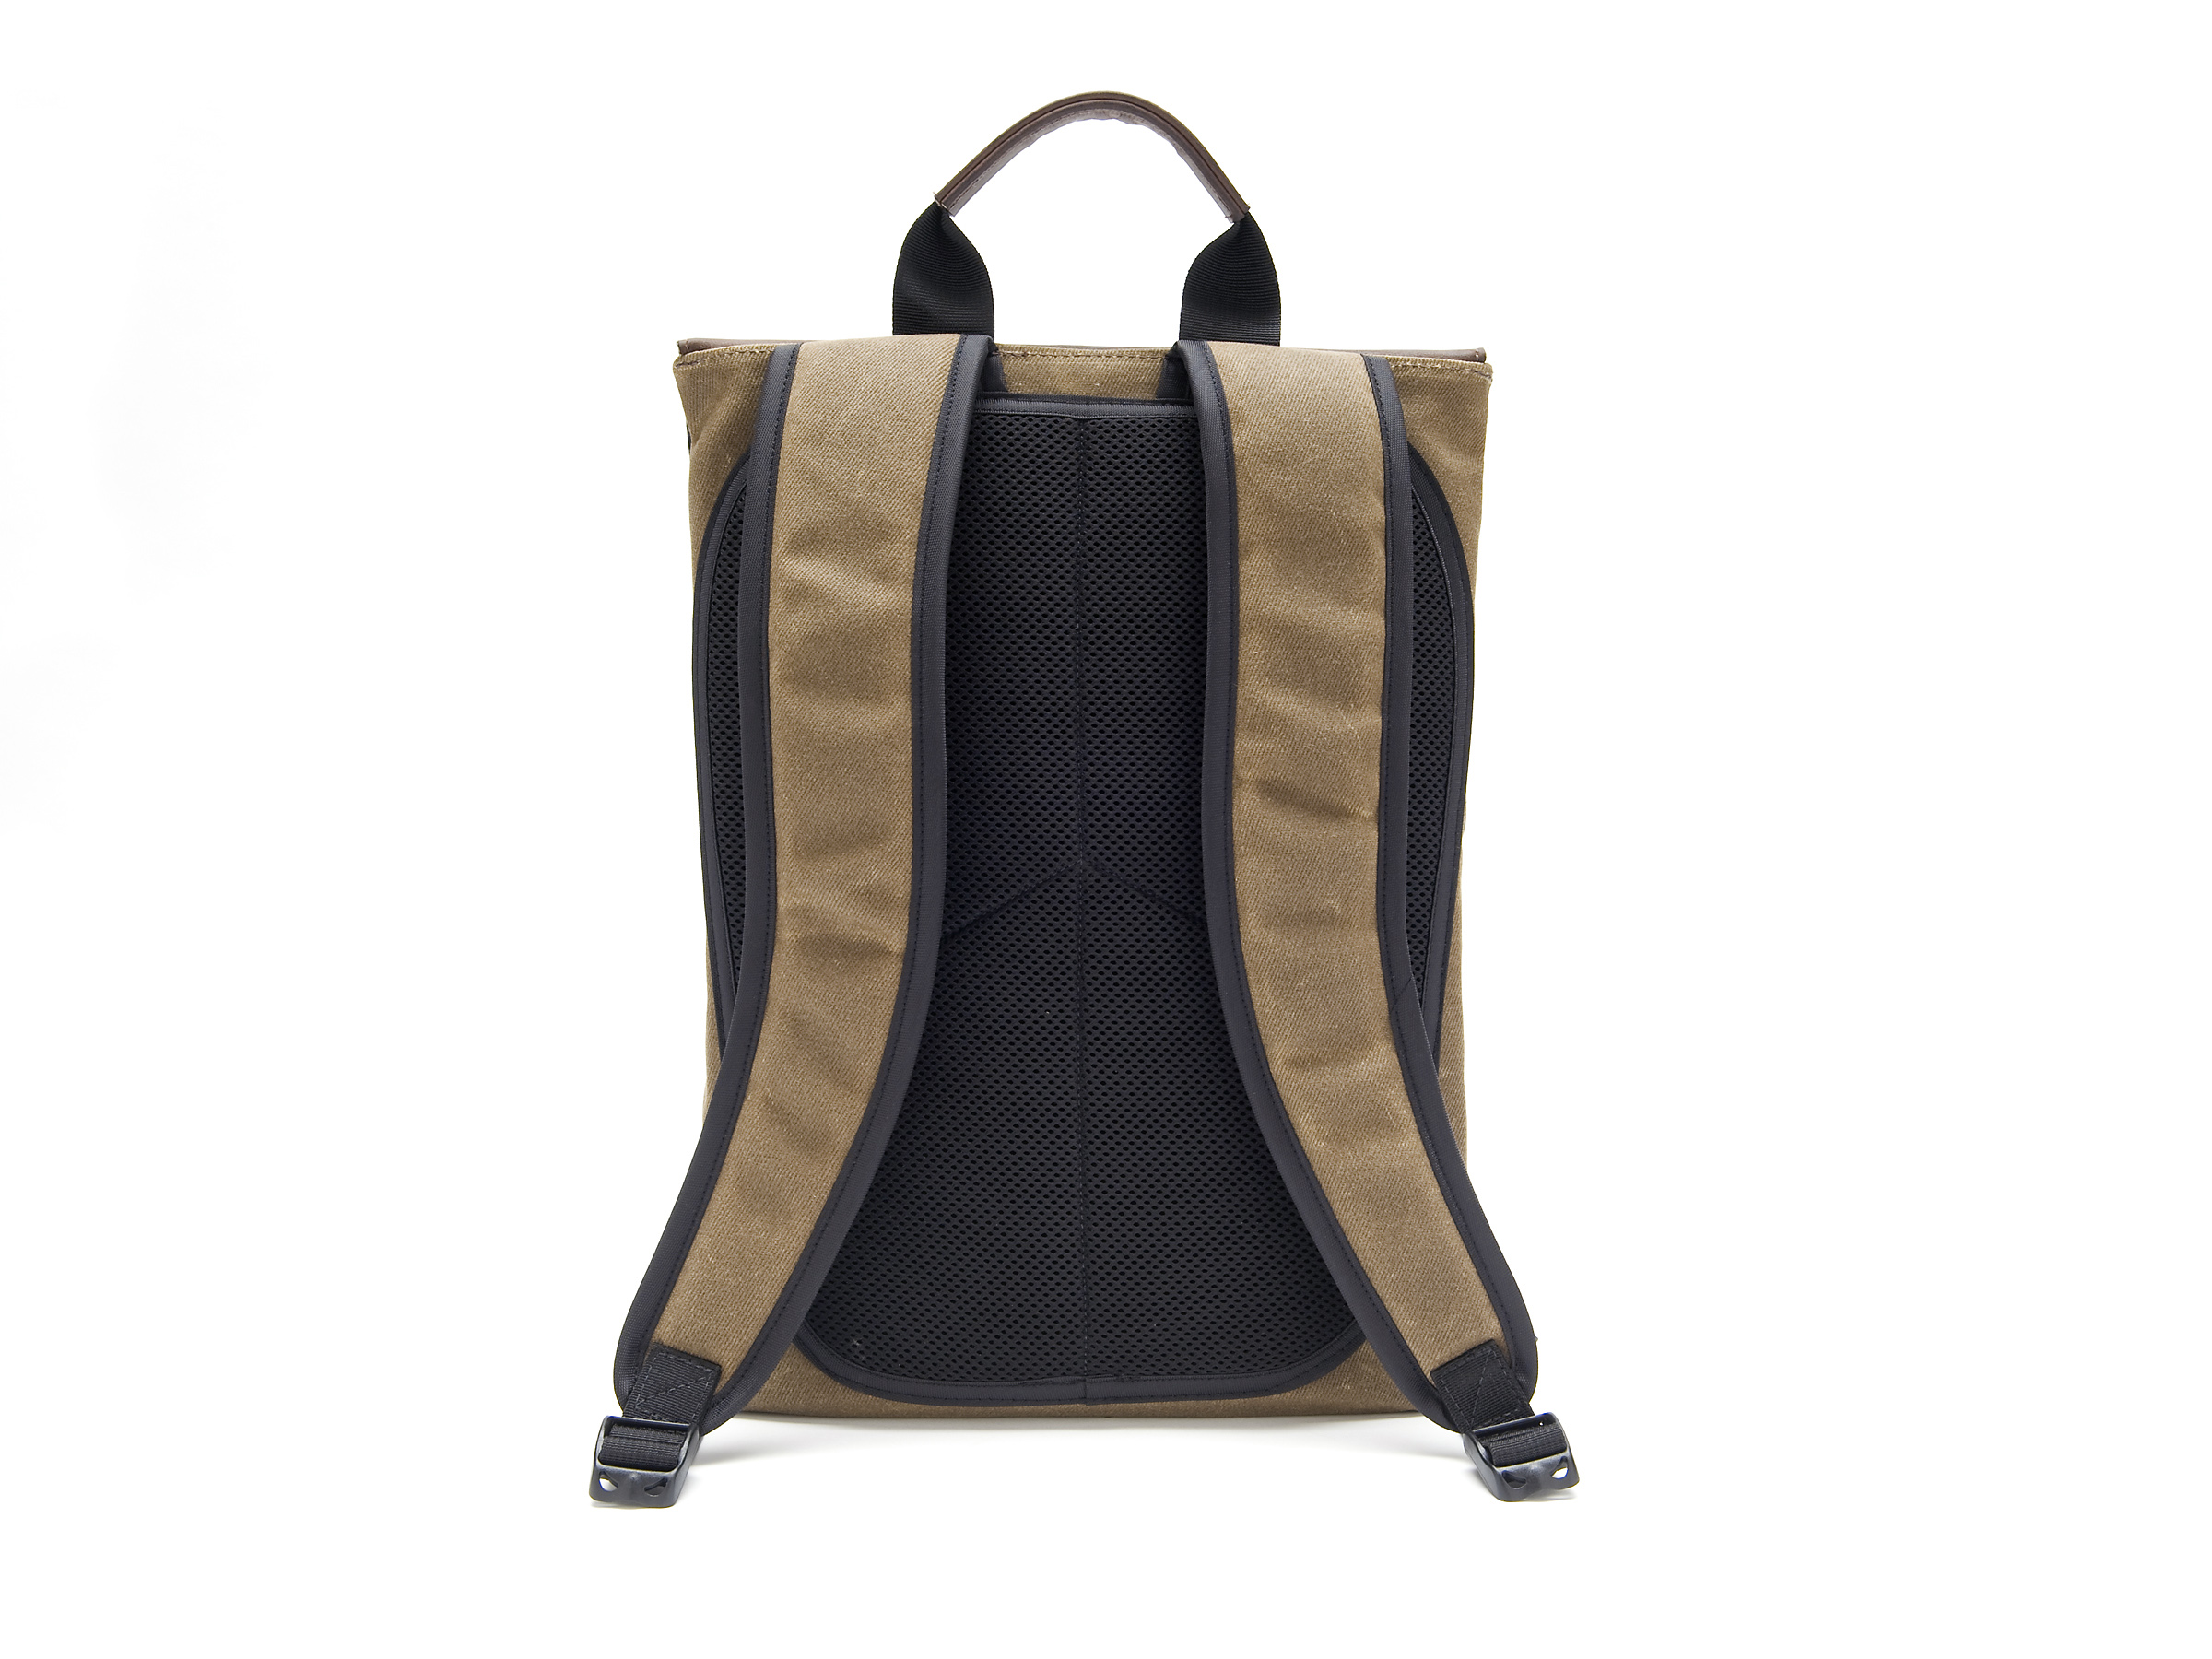 The Staad BackPack